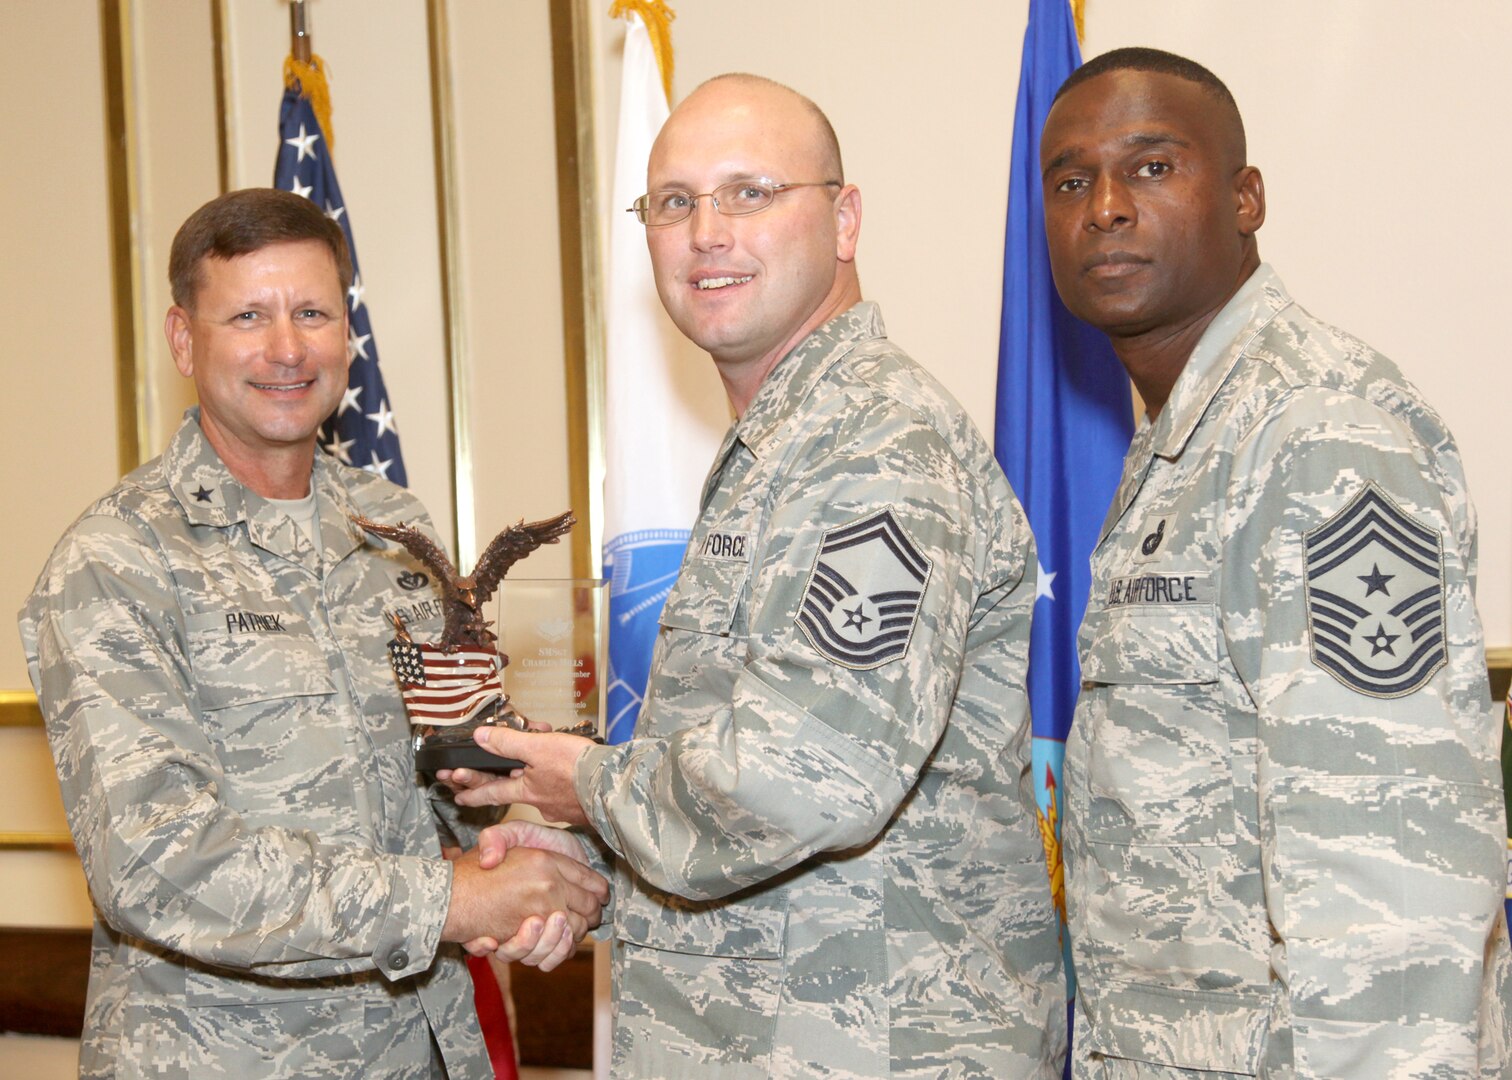 Senior Master Sgt. Charles Mills receives the Senior NCO of the Quarter award from Brig. Gen. Leonard Patrick, 502nd Air Base Wing commander, and Chief Master Sgt. Juan Lewis, 502nd ABW command chief, during the 502nd ABW second quarter awards luncheon July 27 at the Kelly Club. Sergeant Mills is with the 802nd Force Support Squadron. (U.S. Air Force photo/Robbin Cresswell)